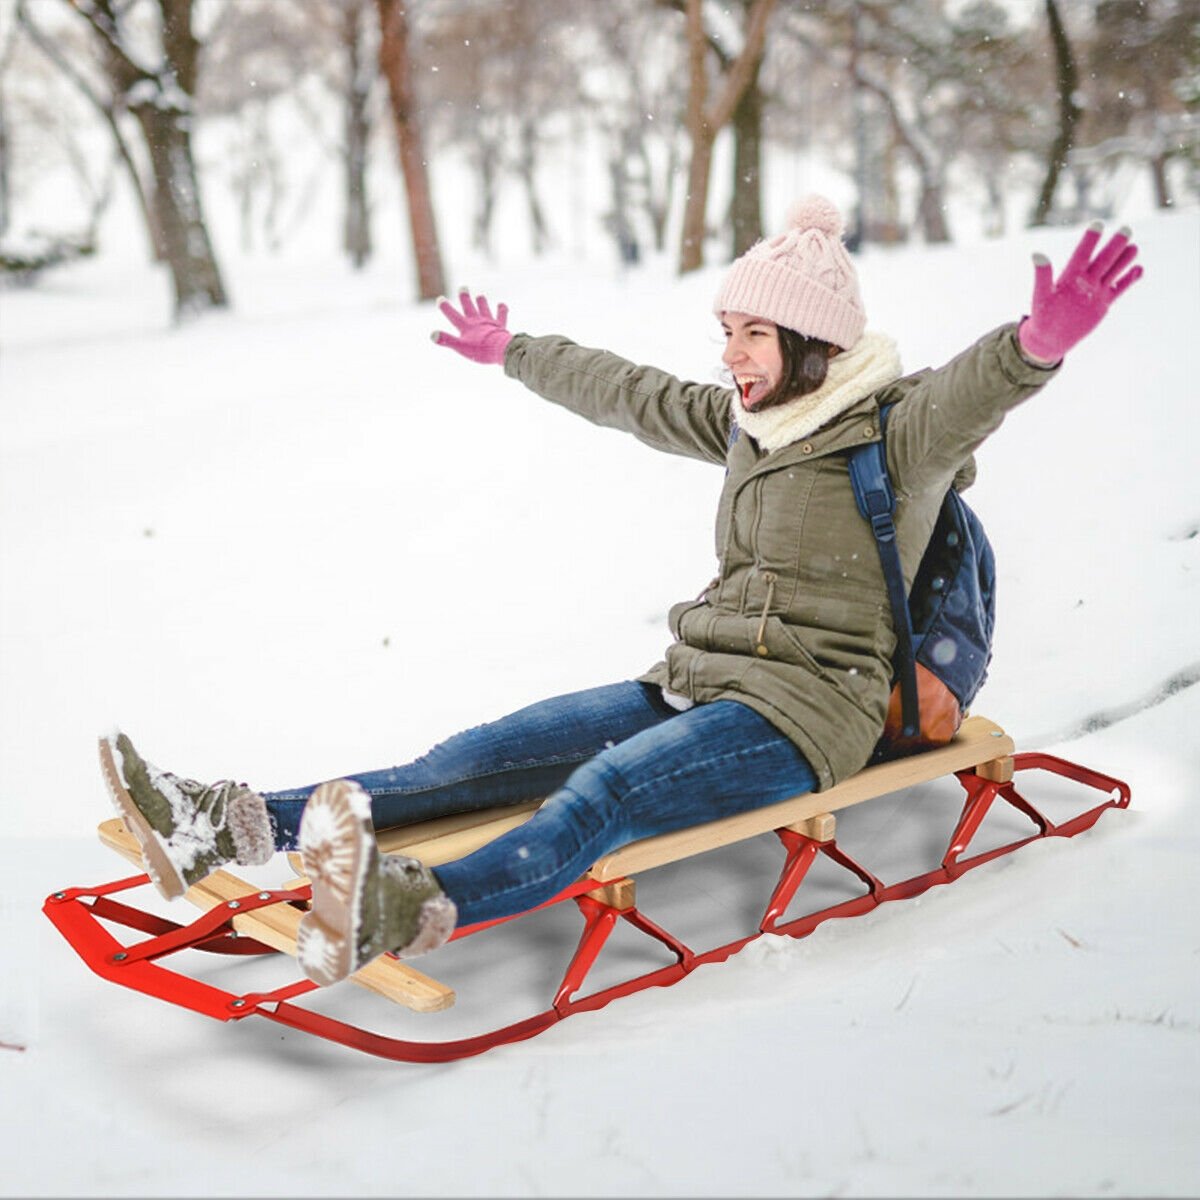 54 Inch Kids Wooden Snow Sled with Metal Runners and Steering Bar, Red